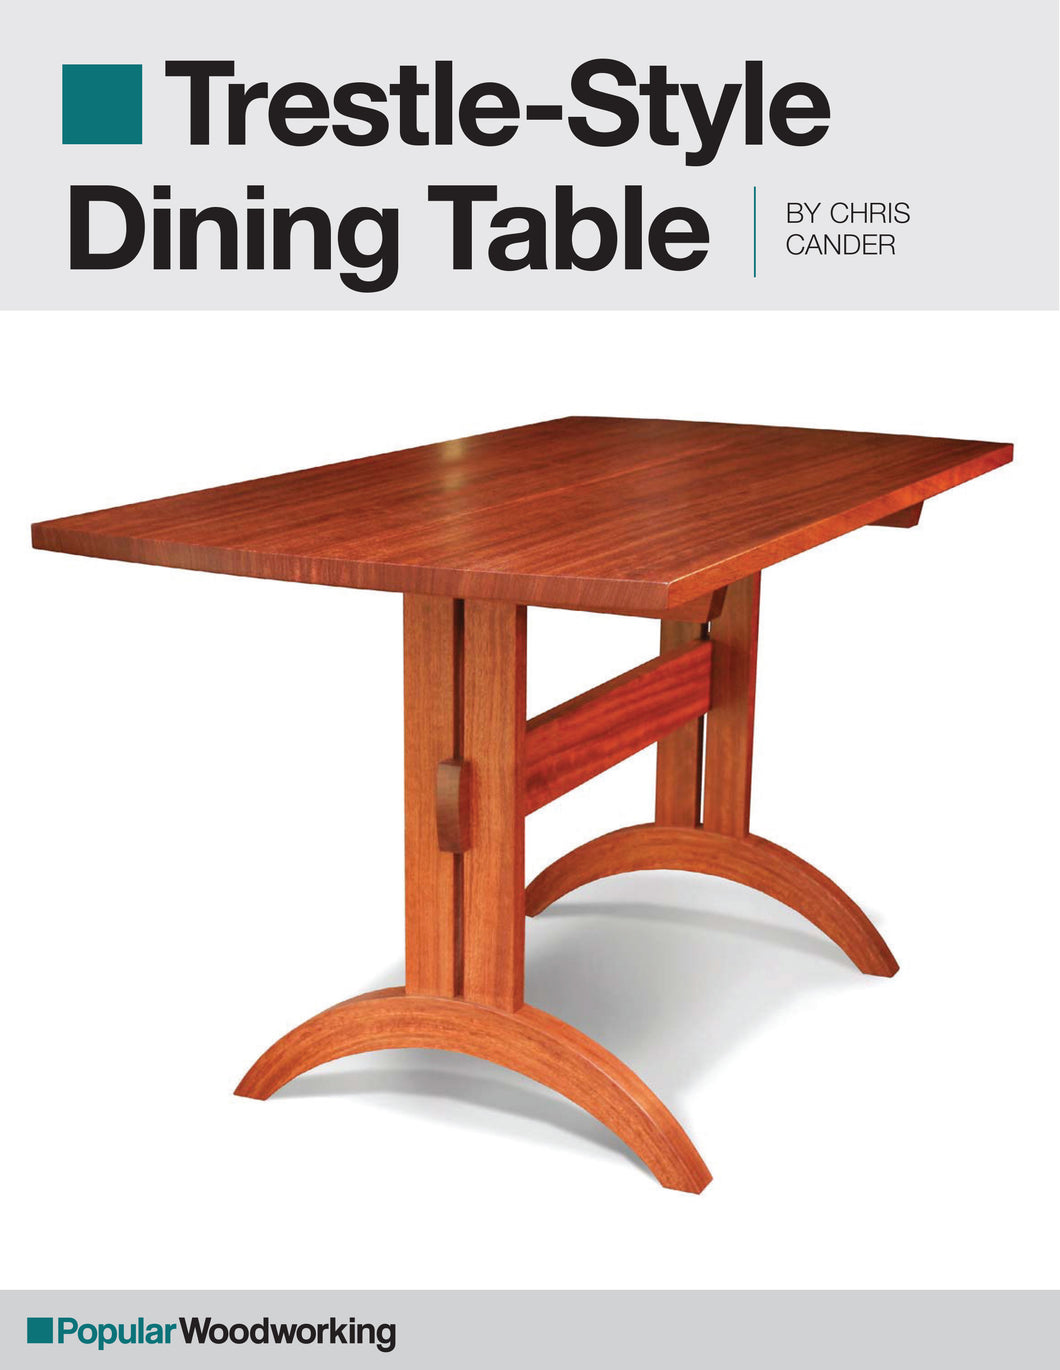 Trestle-Style Dining Table Project Download